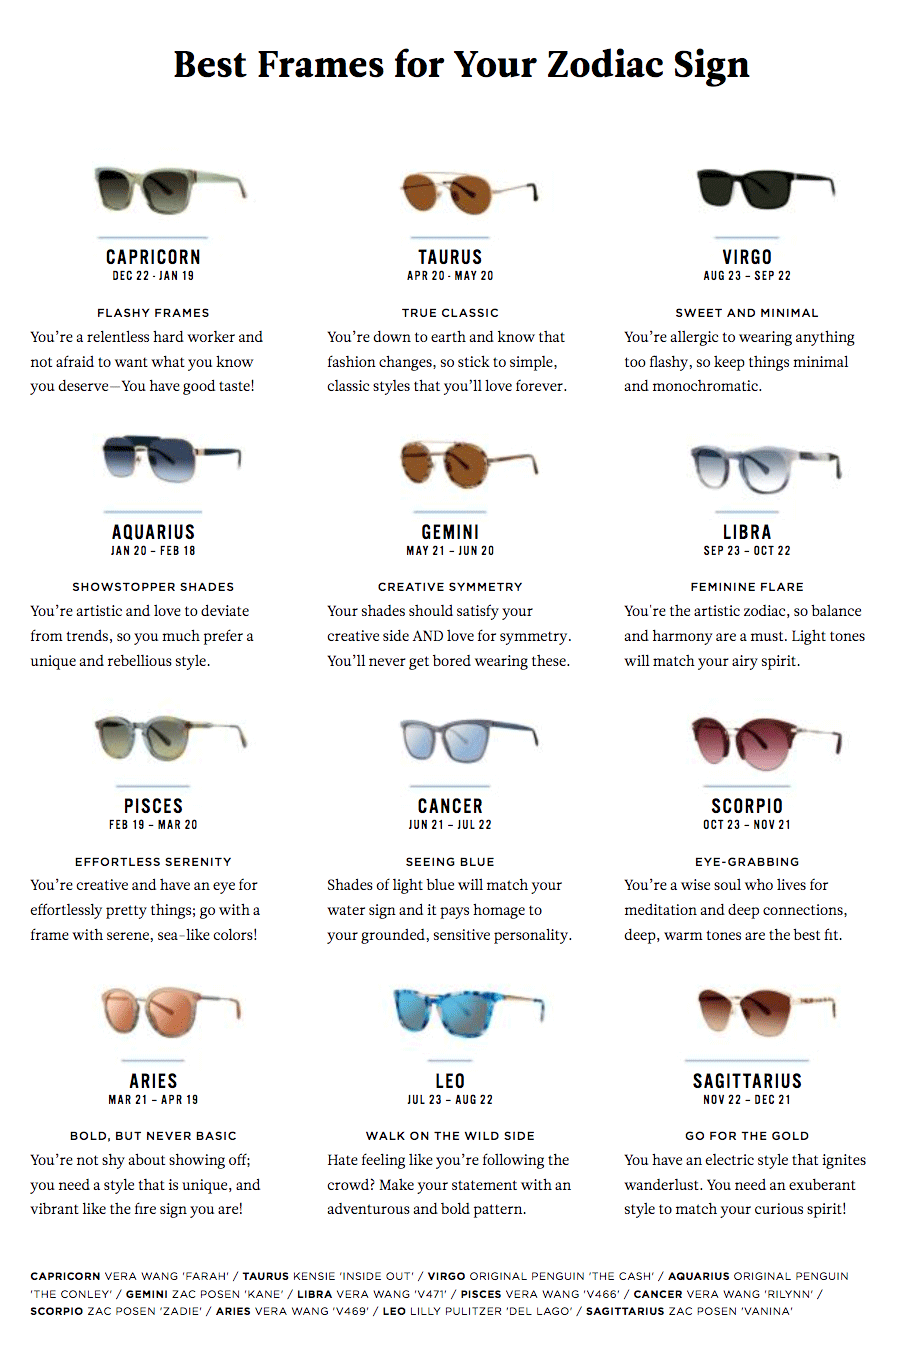 What are the Best Eyeglass Frames Styles for My Zodiac Sign